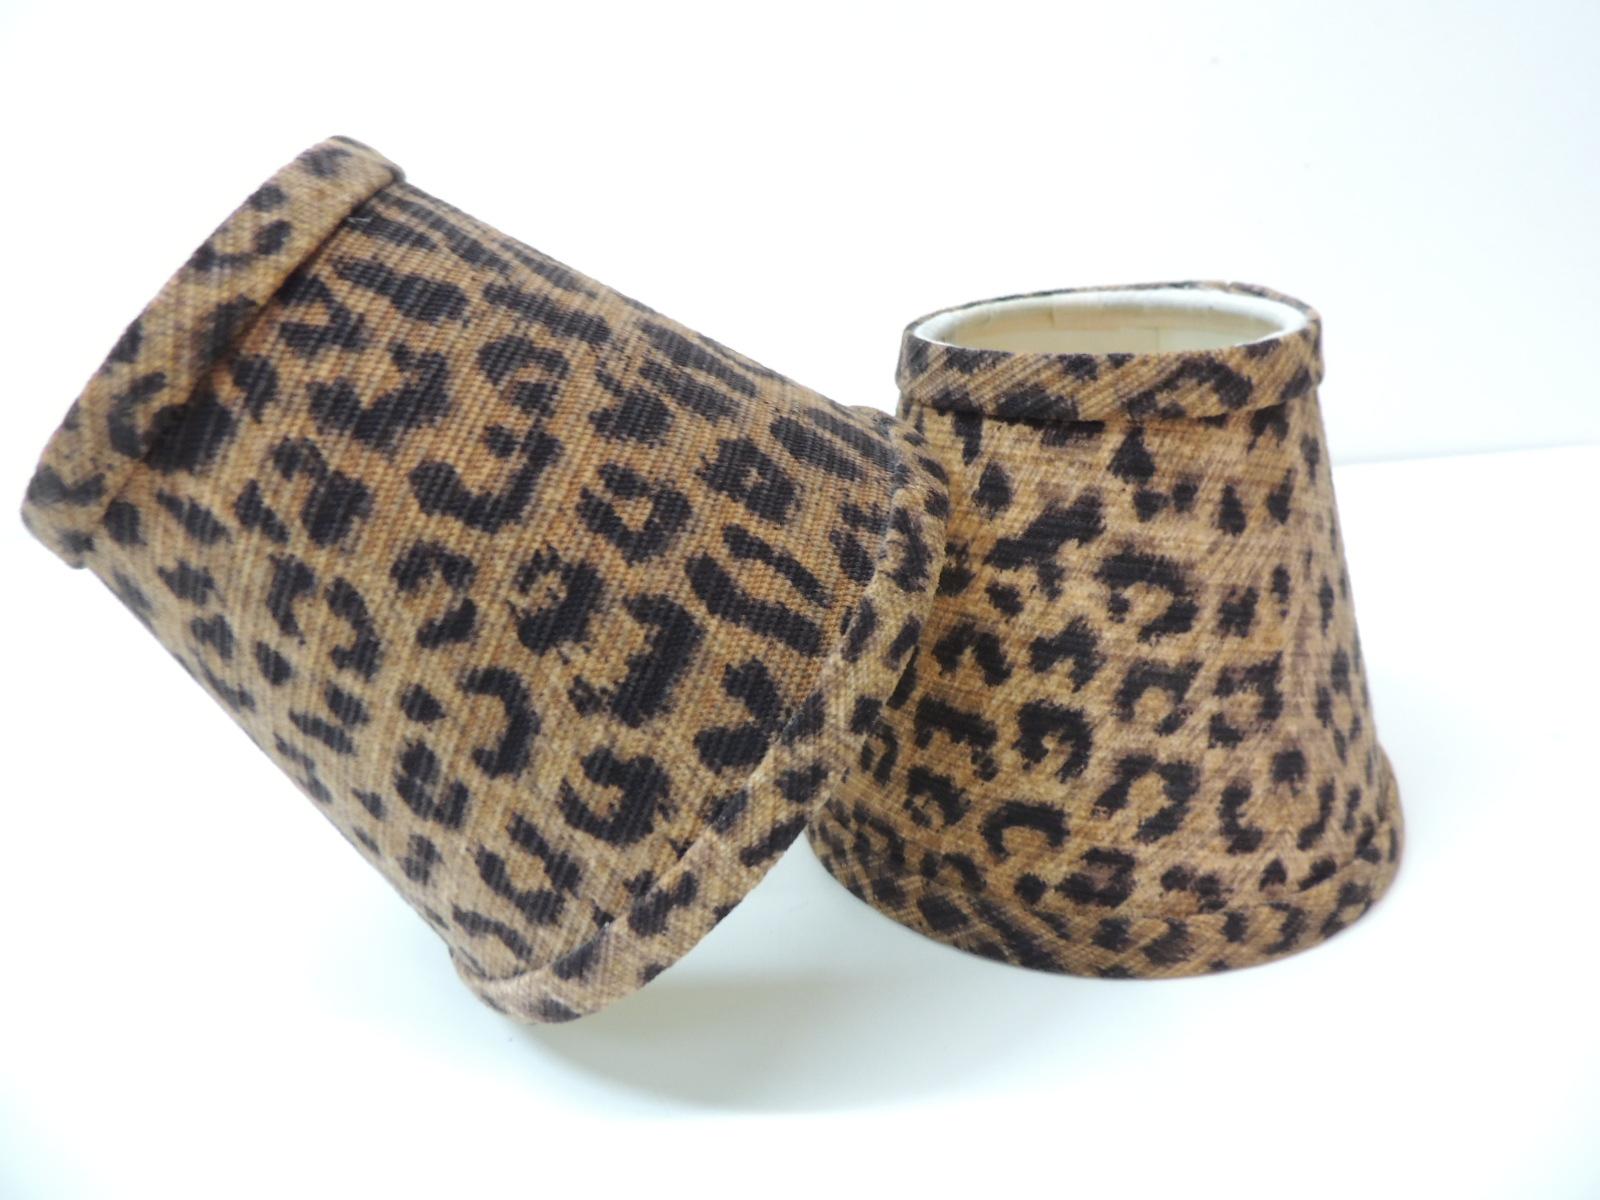 Set of tow small candelabras leopards cotton fabric woven lamp shades and self welt.
Small brass clip-on shades.
Ideal for single table lamps, sconces or chandeliers.
Size: 5” W at bottom x 4.5” H x 3” top.